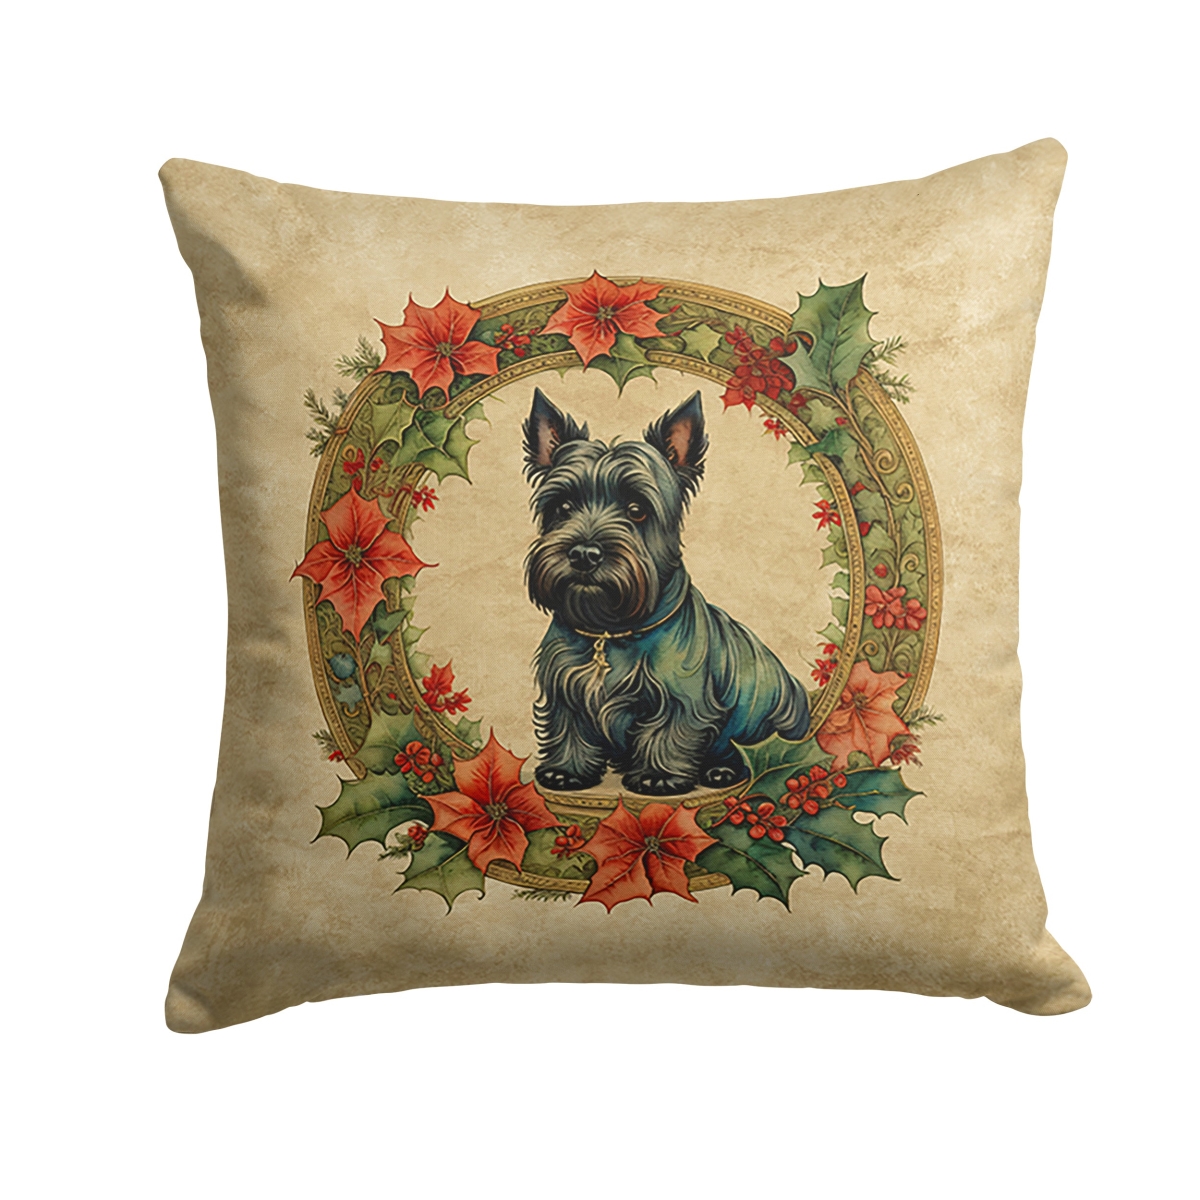 Caroline's Treasures DAC2425PW1414 14 x 14 in. Unisex Scottish Terrier Christmas Flowers Polyester Fabric Throw Pillow